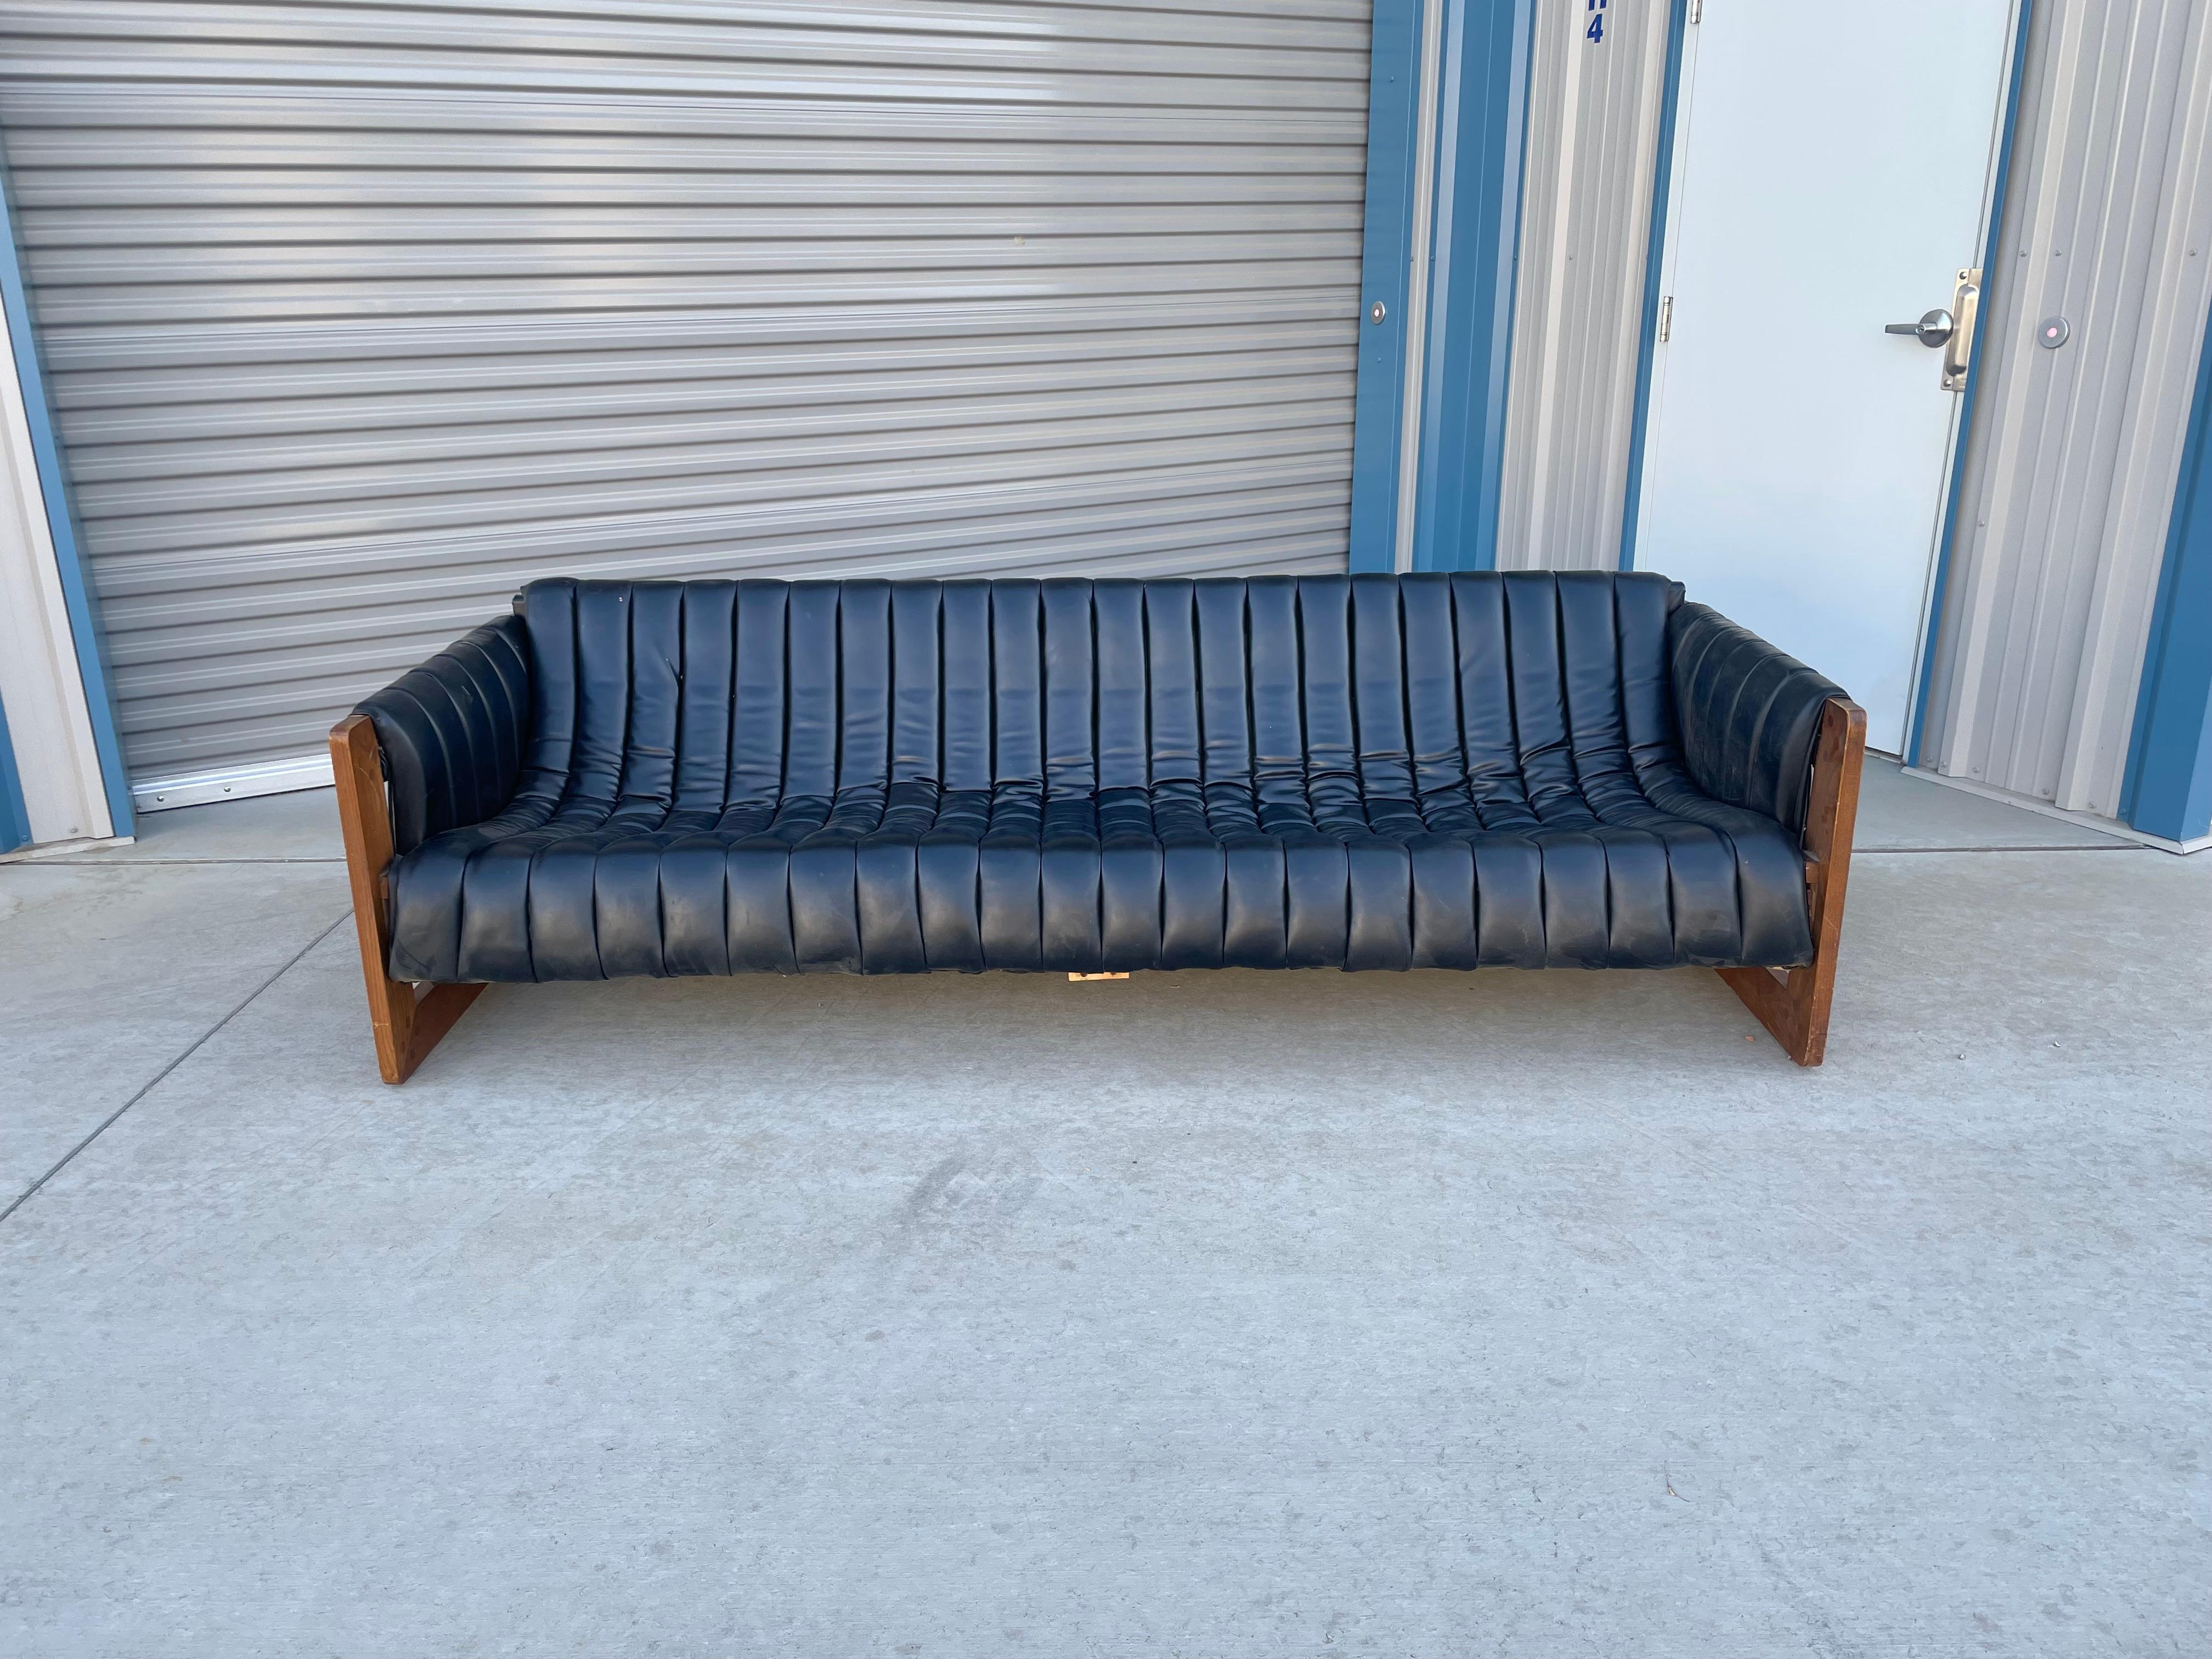 Hollywood regency black leather sofa designed and manufactured in the United States circa 1970s. This beautiful vintage sofa features tufted sling seating with unique walnut hardwood frame legs, making them a one-of-a-kind piece. The design is